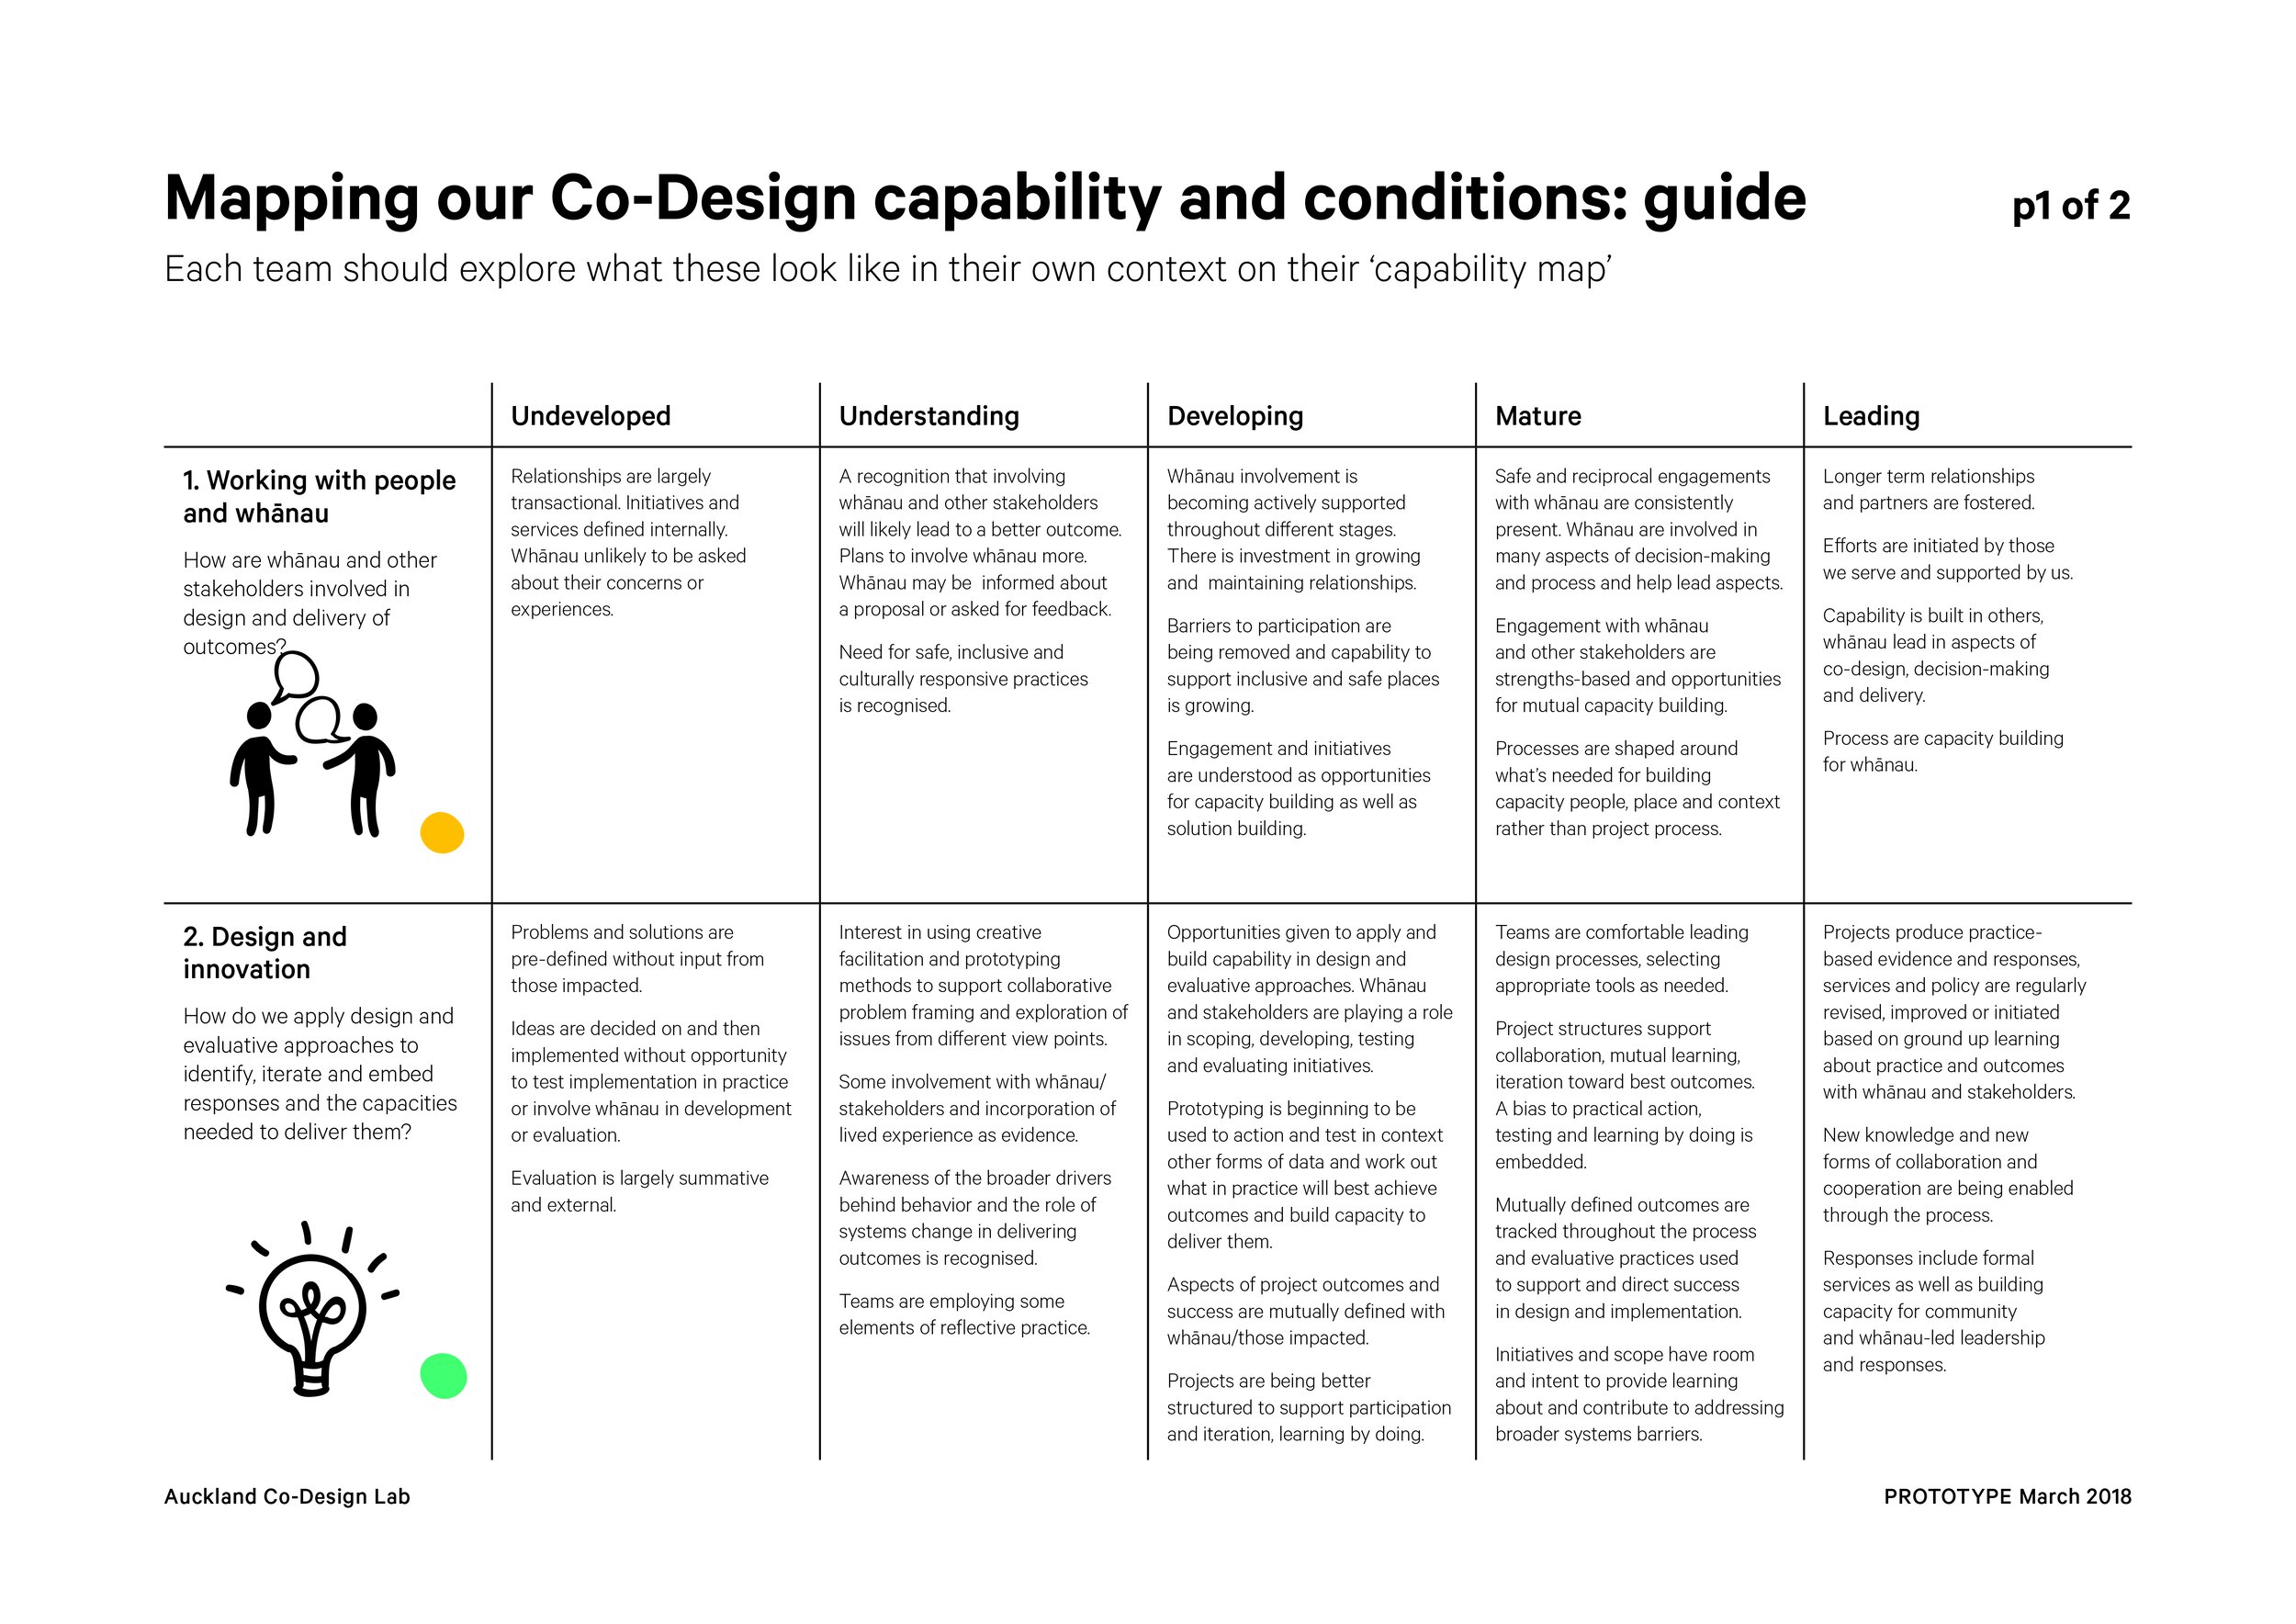 Capability+Workshop+Booklet+A3-8.jpg